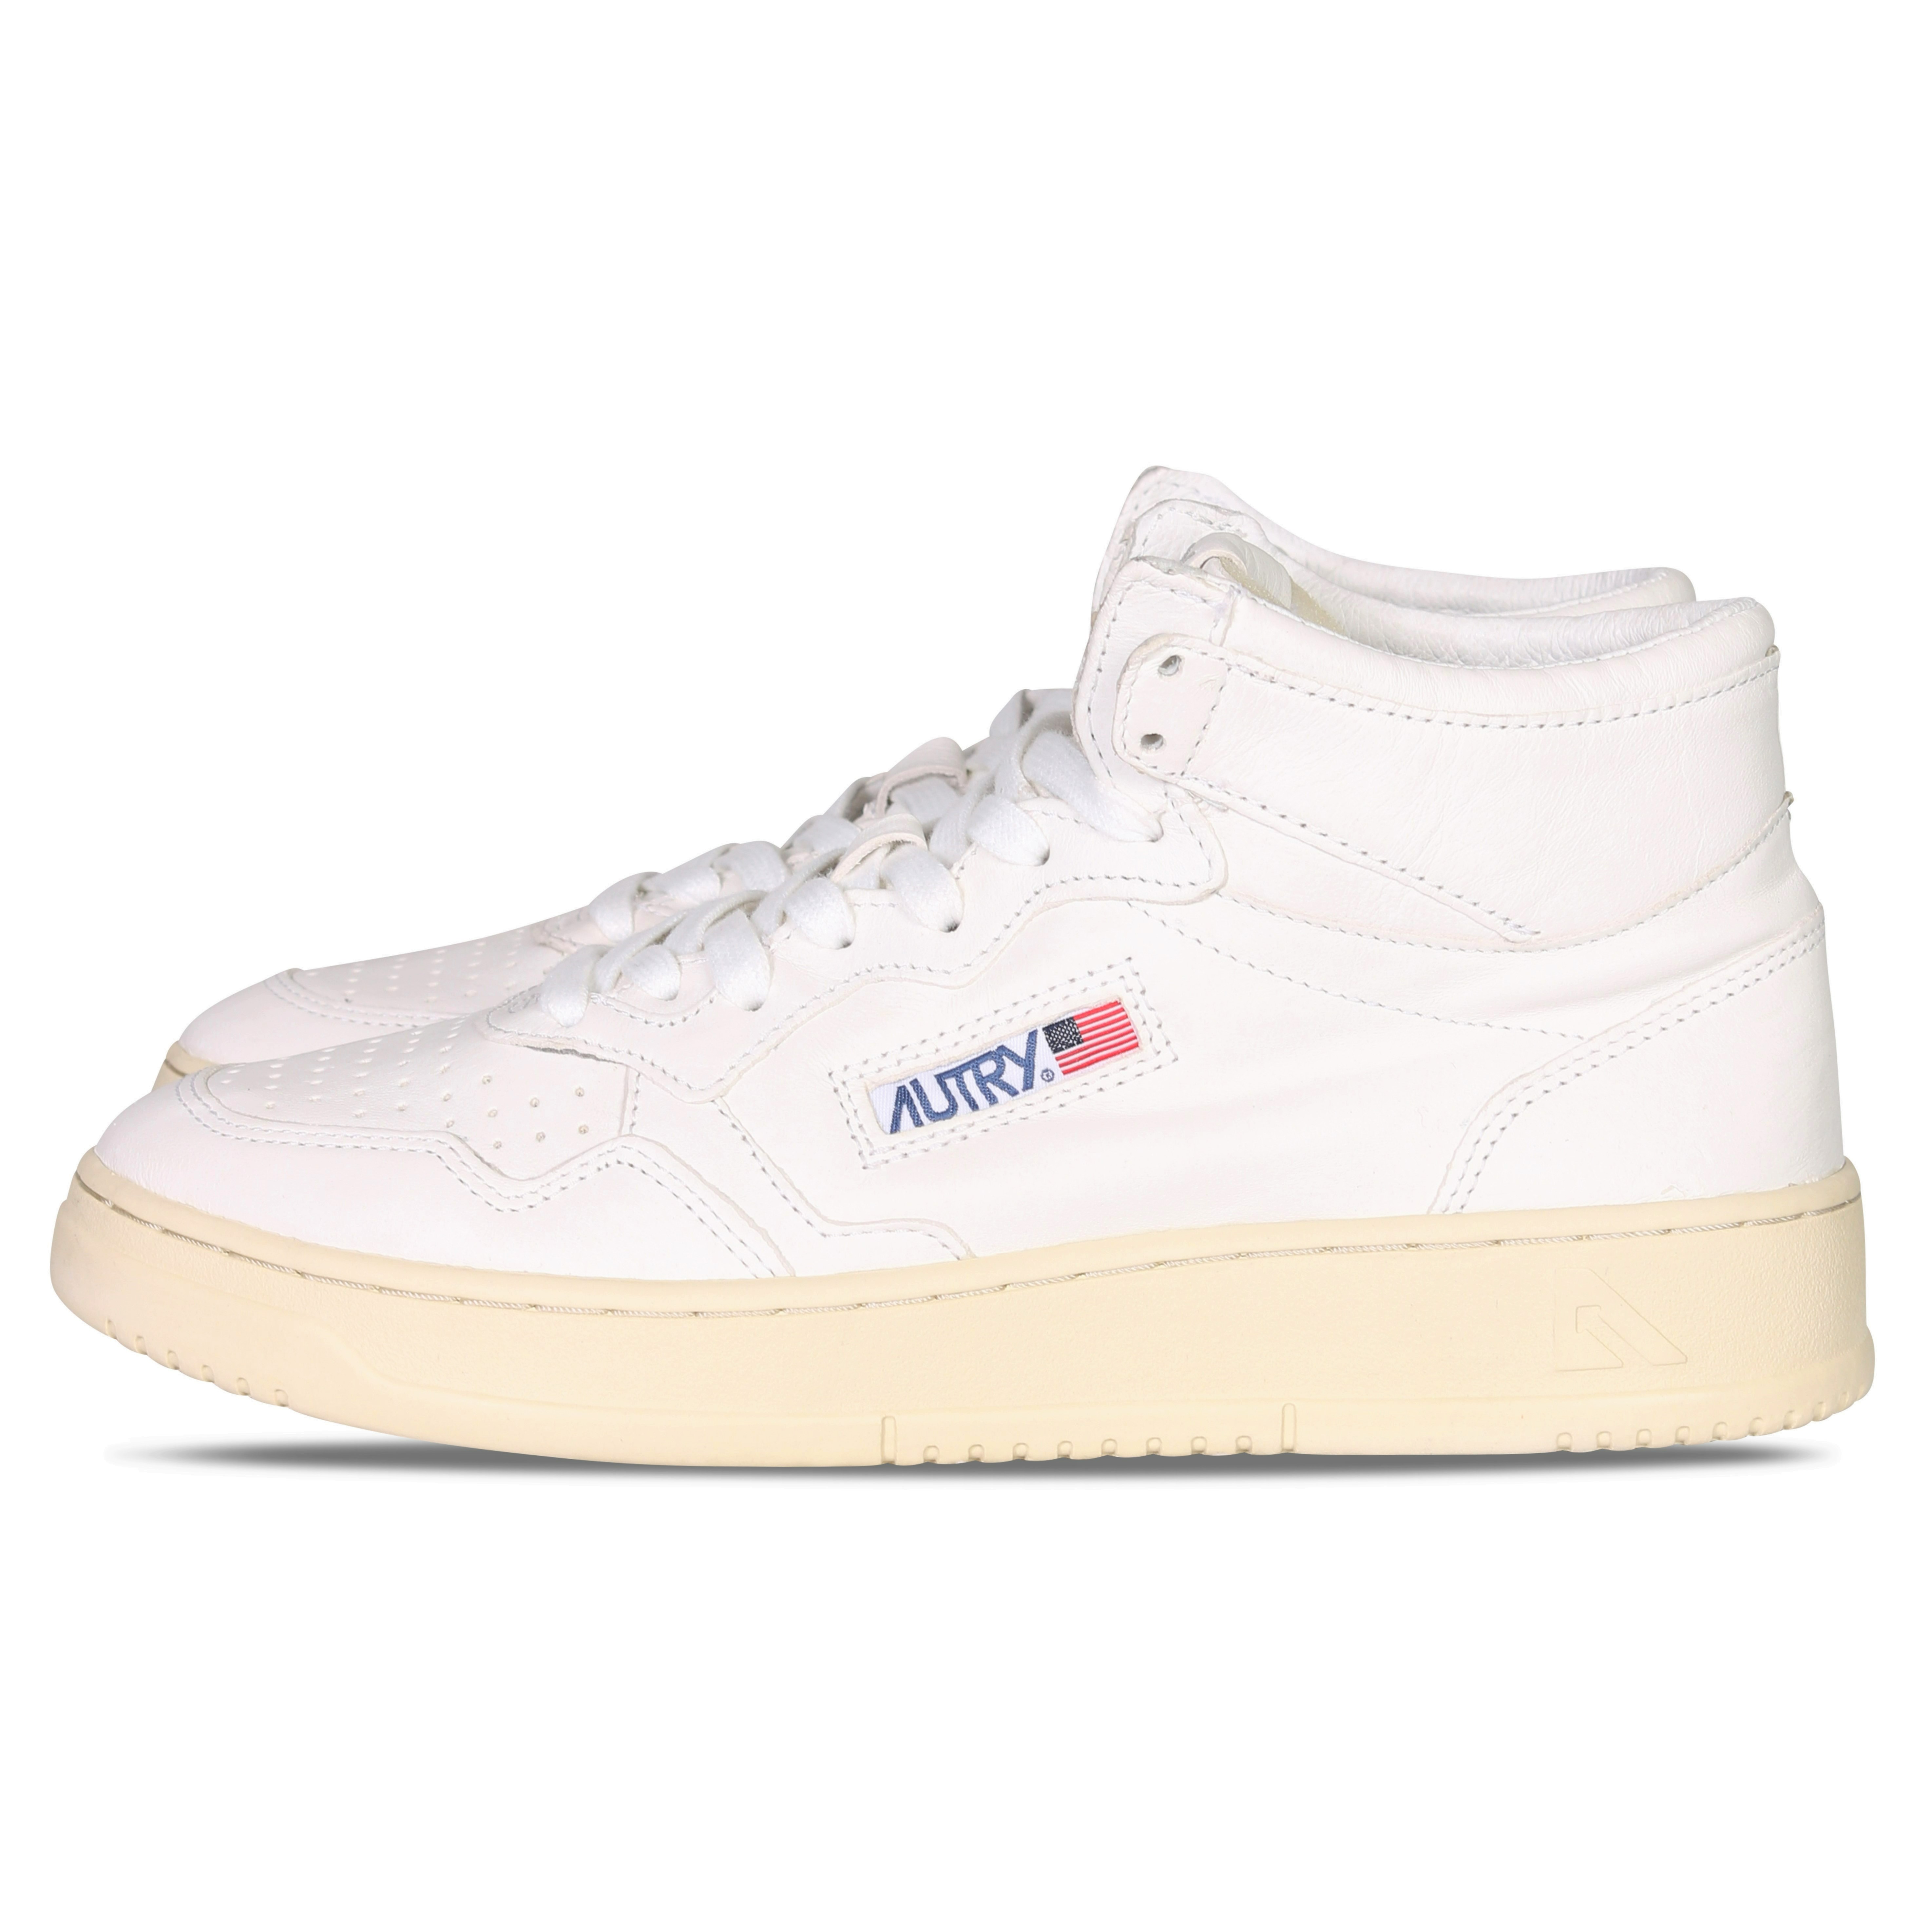 Autry Action Shoes Mid Sneaker Goat White/White